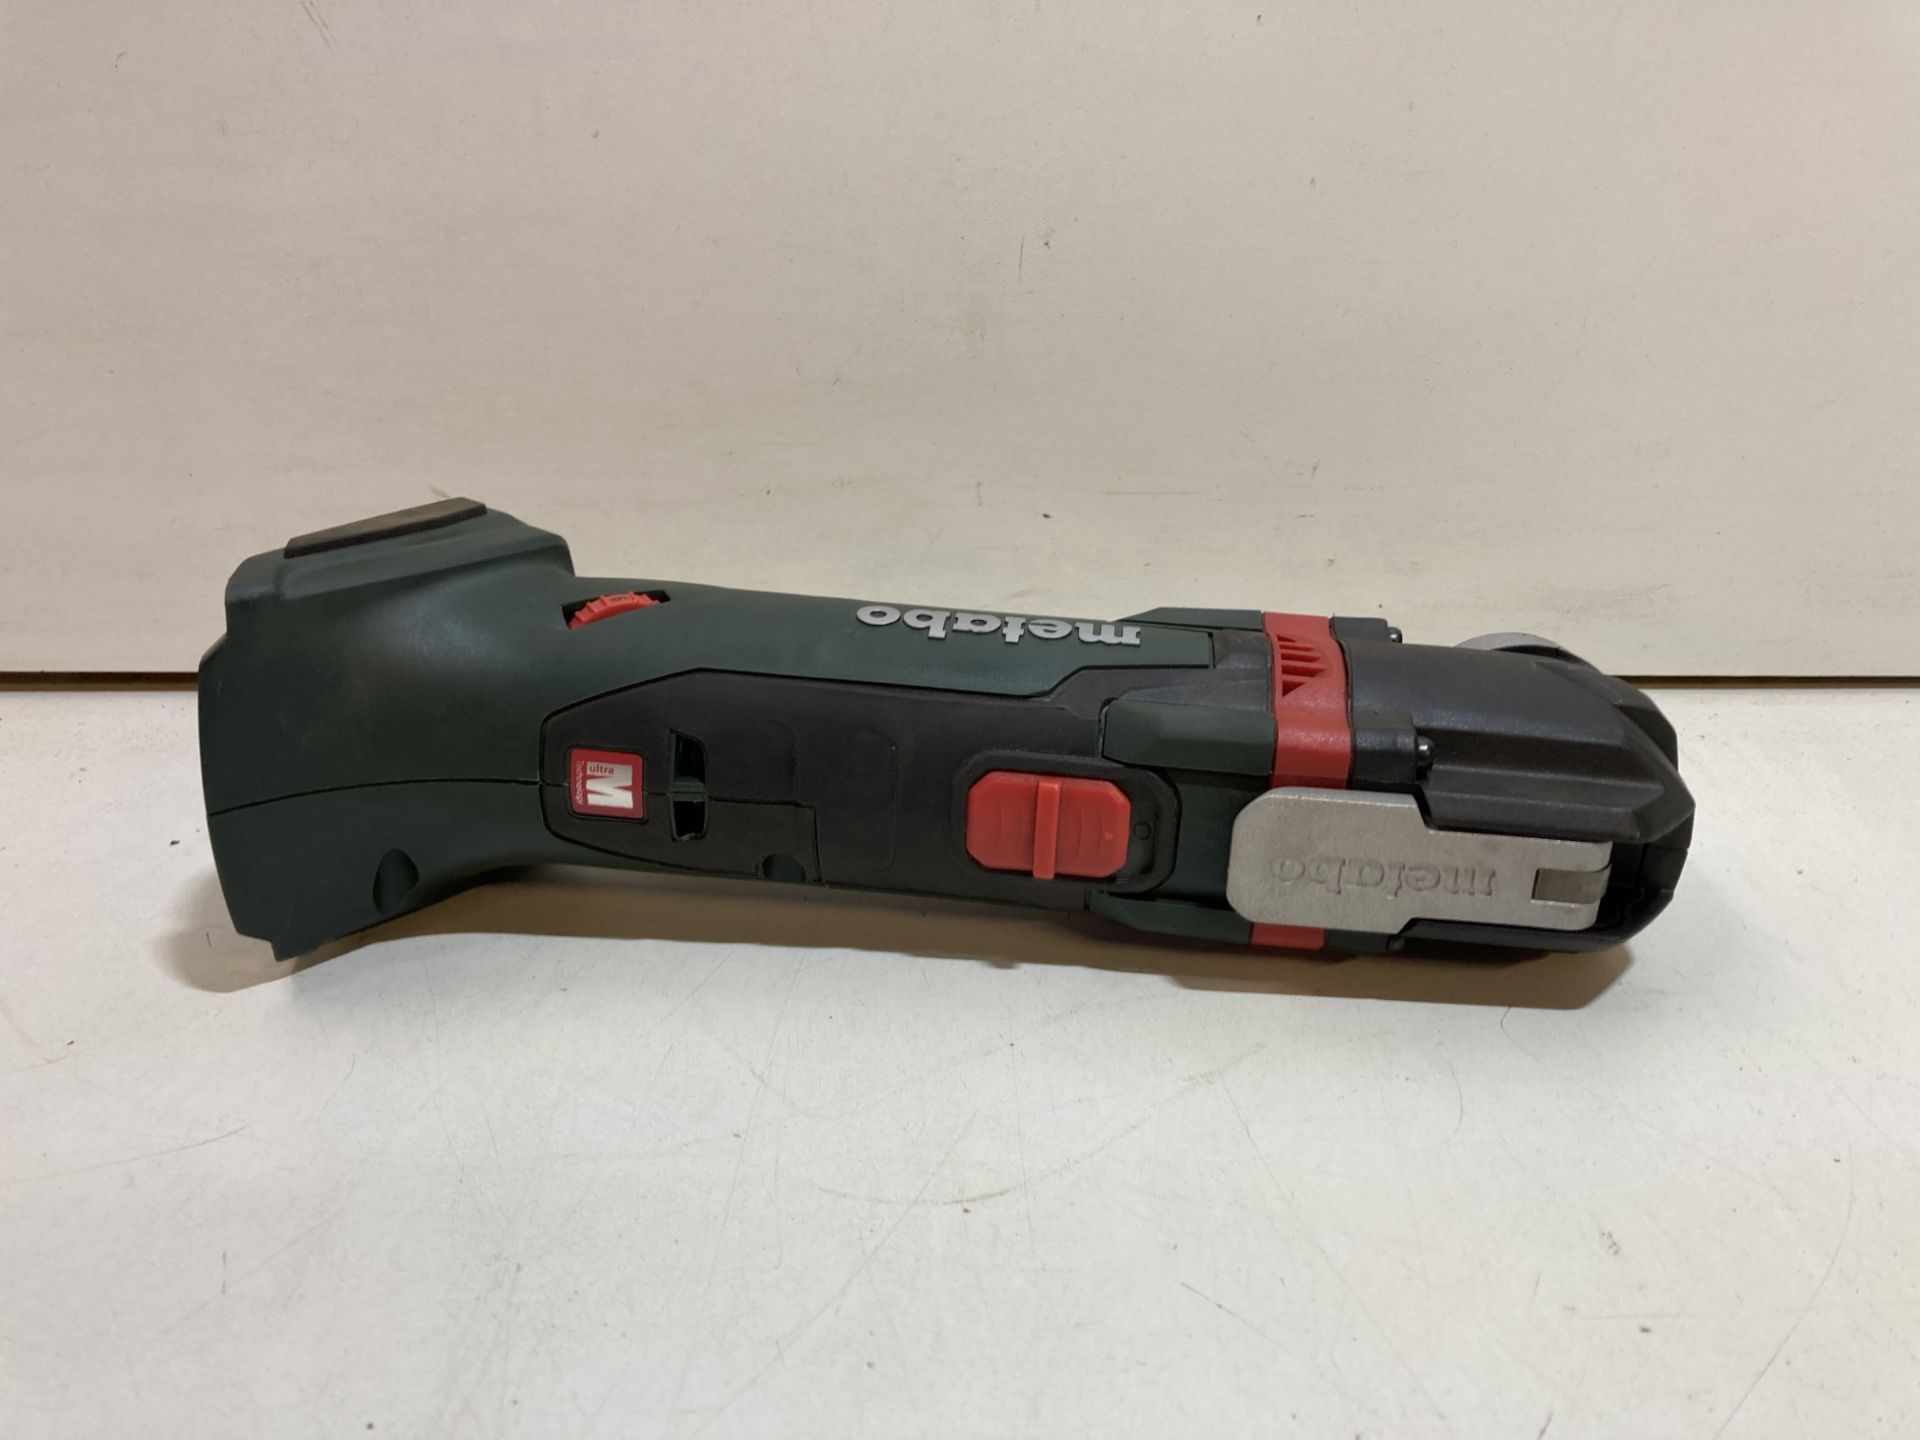 Metabo MT 18 LTX Cordless Oscillating Multi-Tool | BODY ONLY | RRP: £128.80 - Image 2 of 4